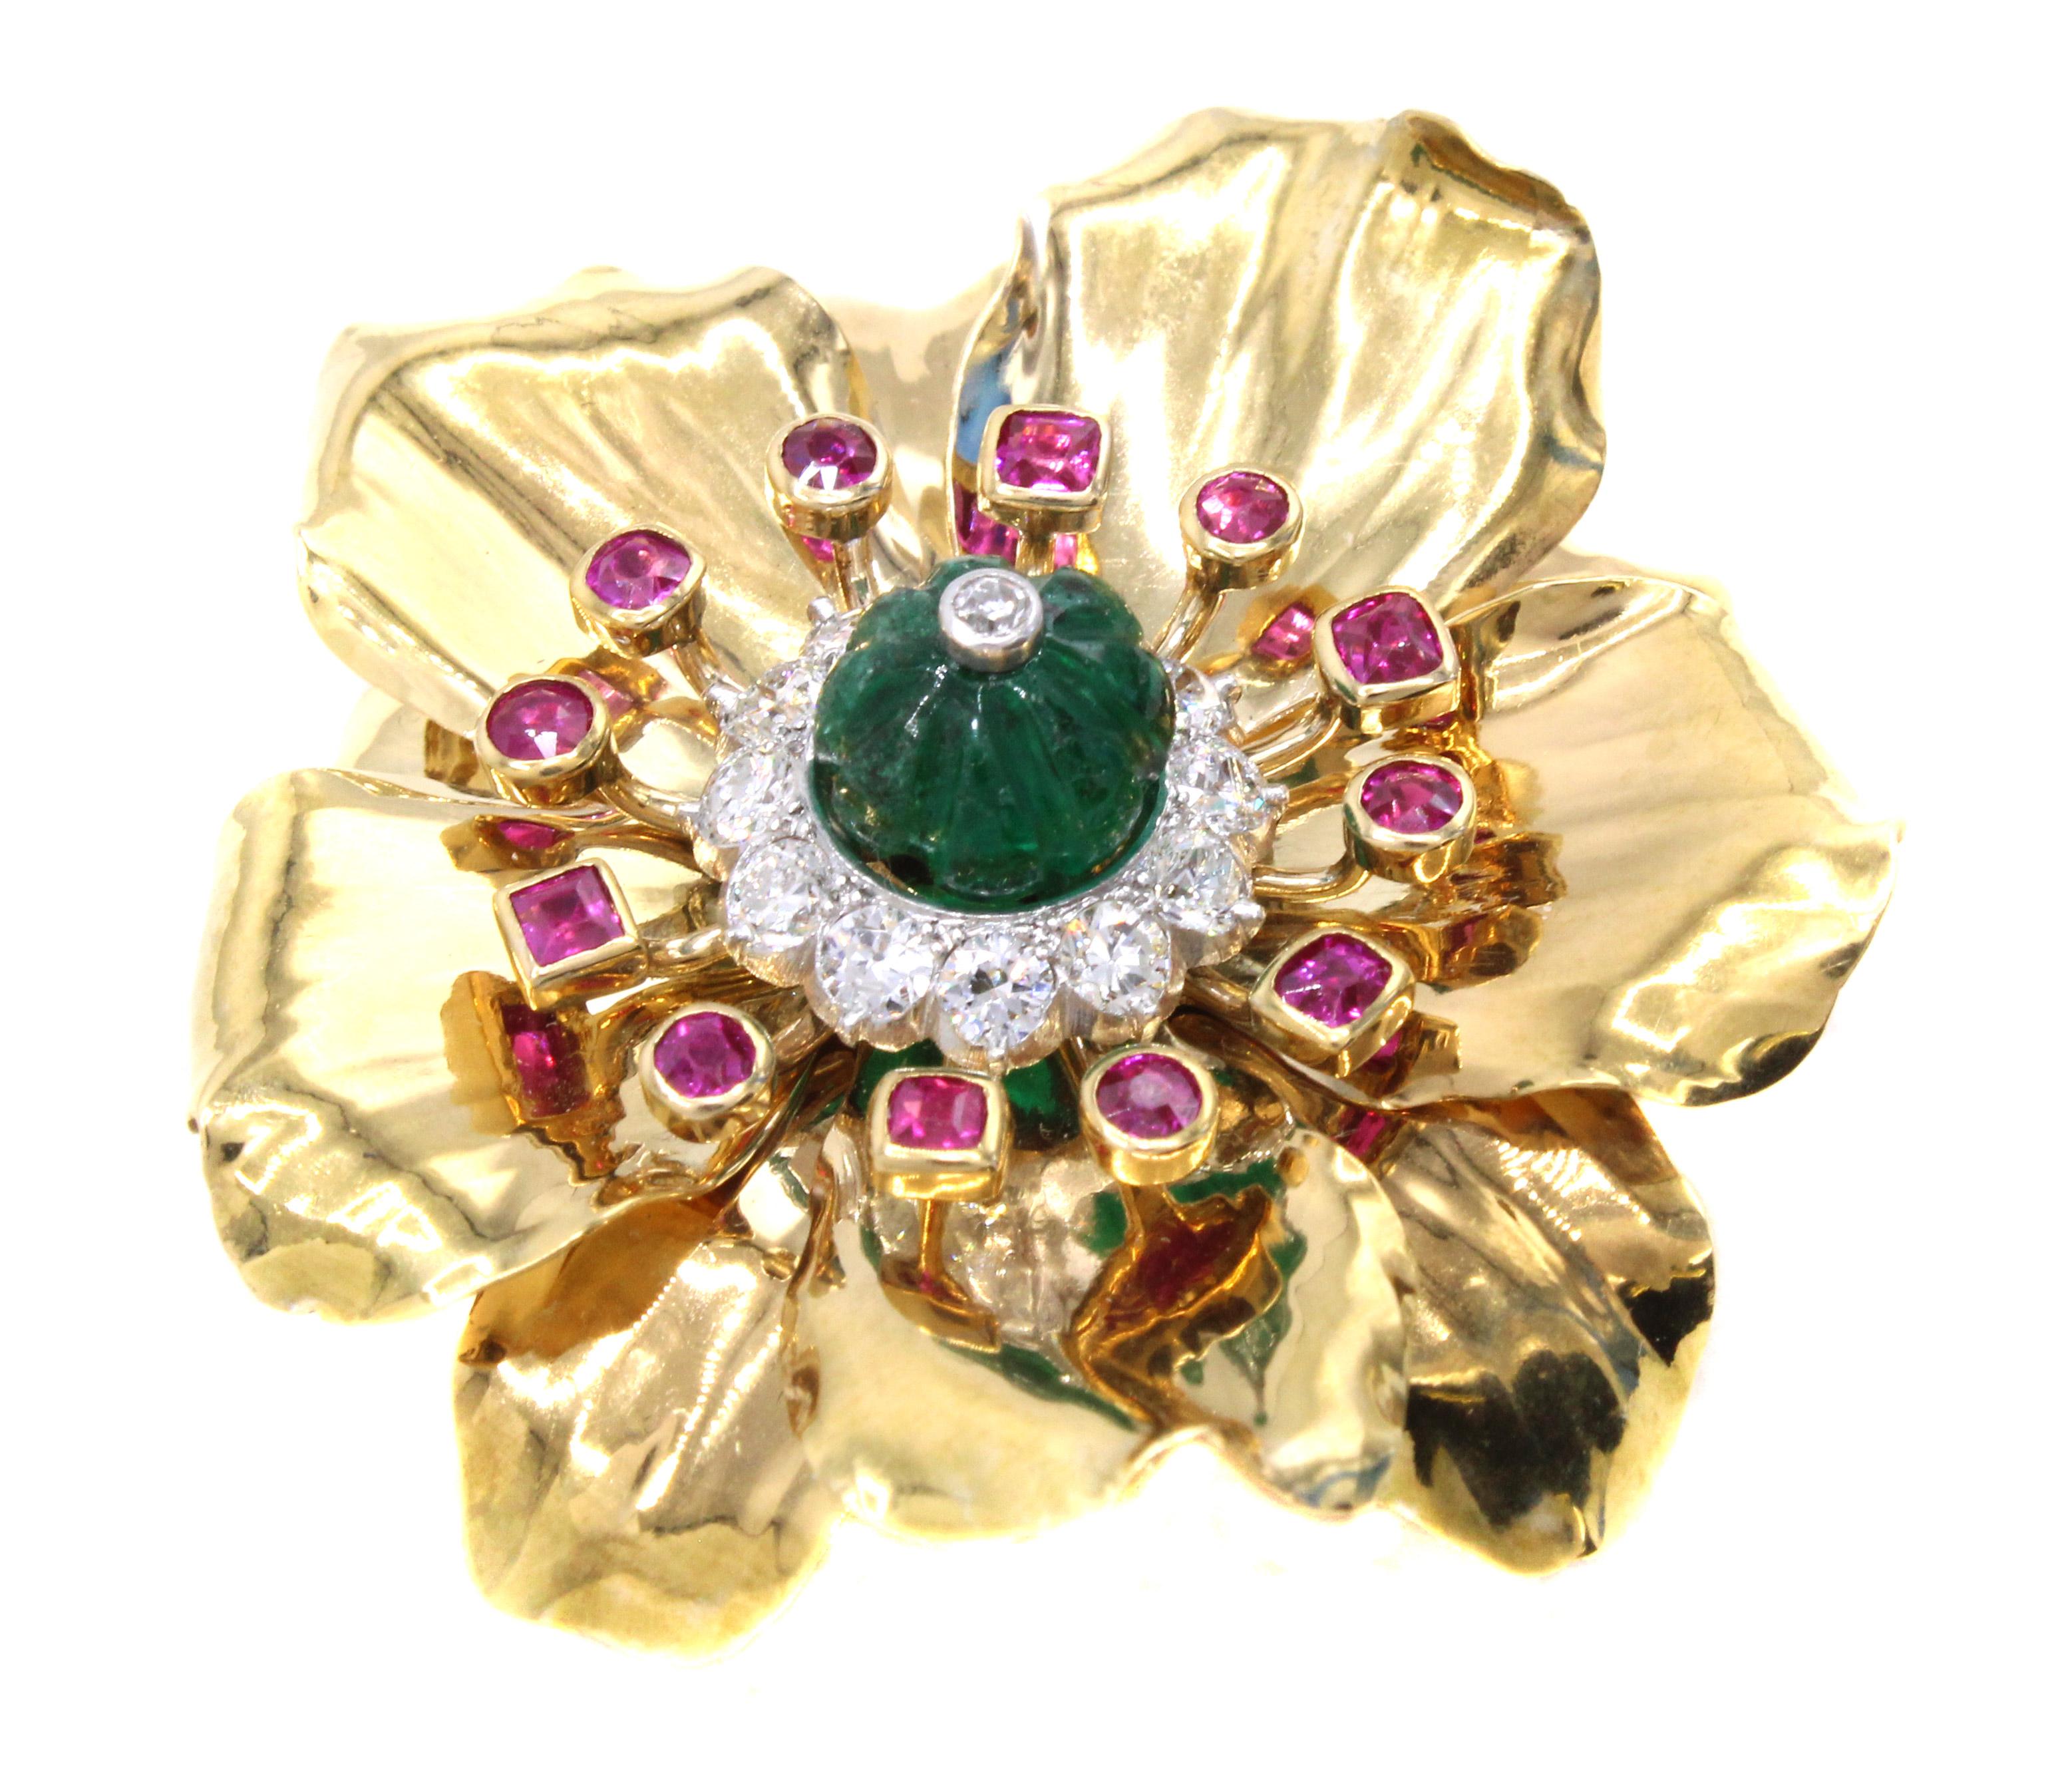 This rare Art Deco flower brooch by Cartier Paris, from ca 1938,  was designed to exhibit an amazing 3 dimensional look of a flower blossom, with all petals at different heights and angles in order to mimic true nature. The petals are worked in 18